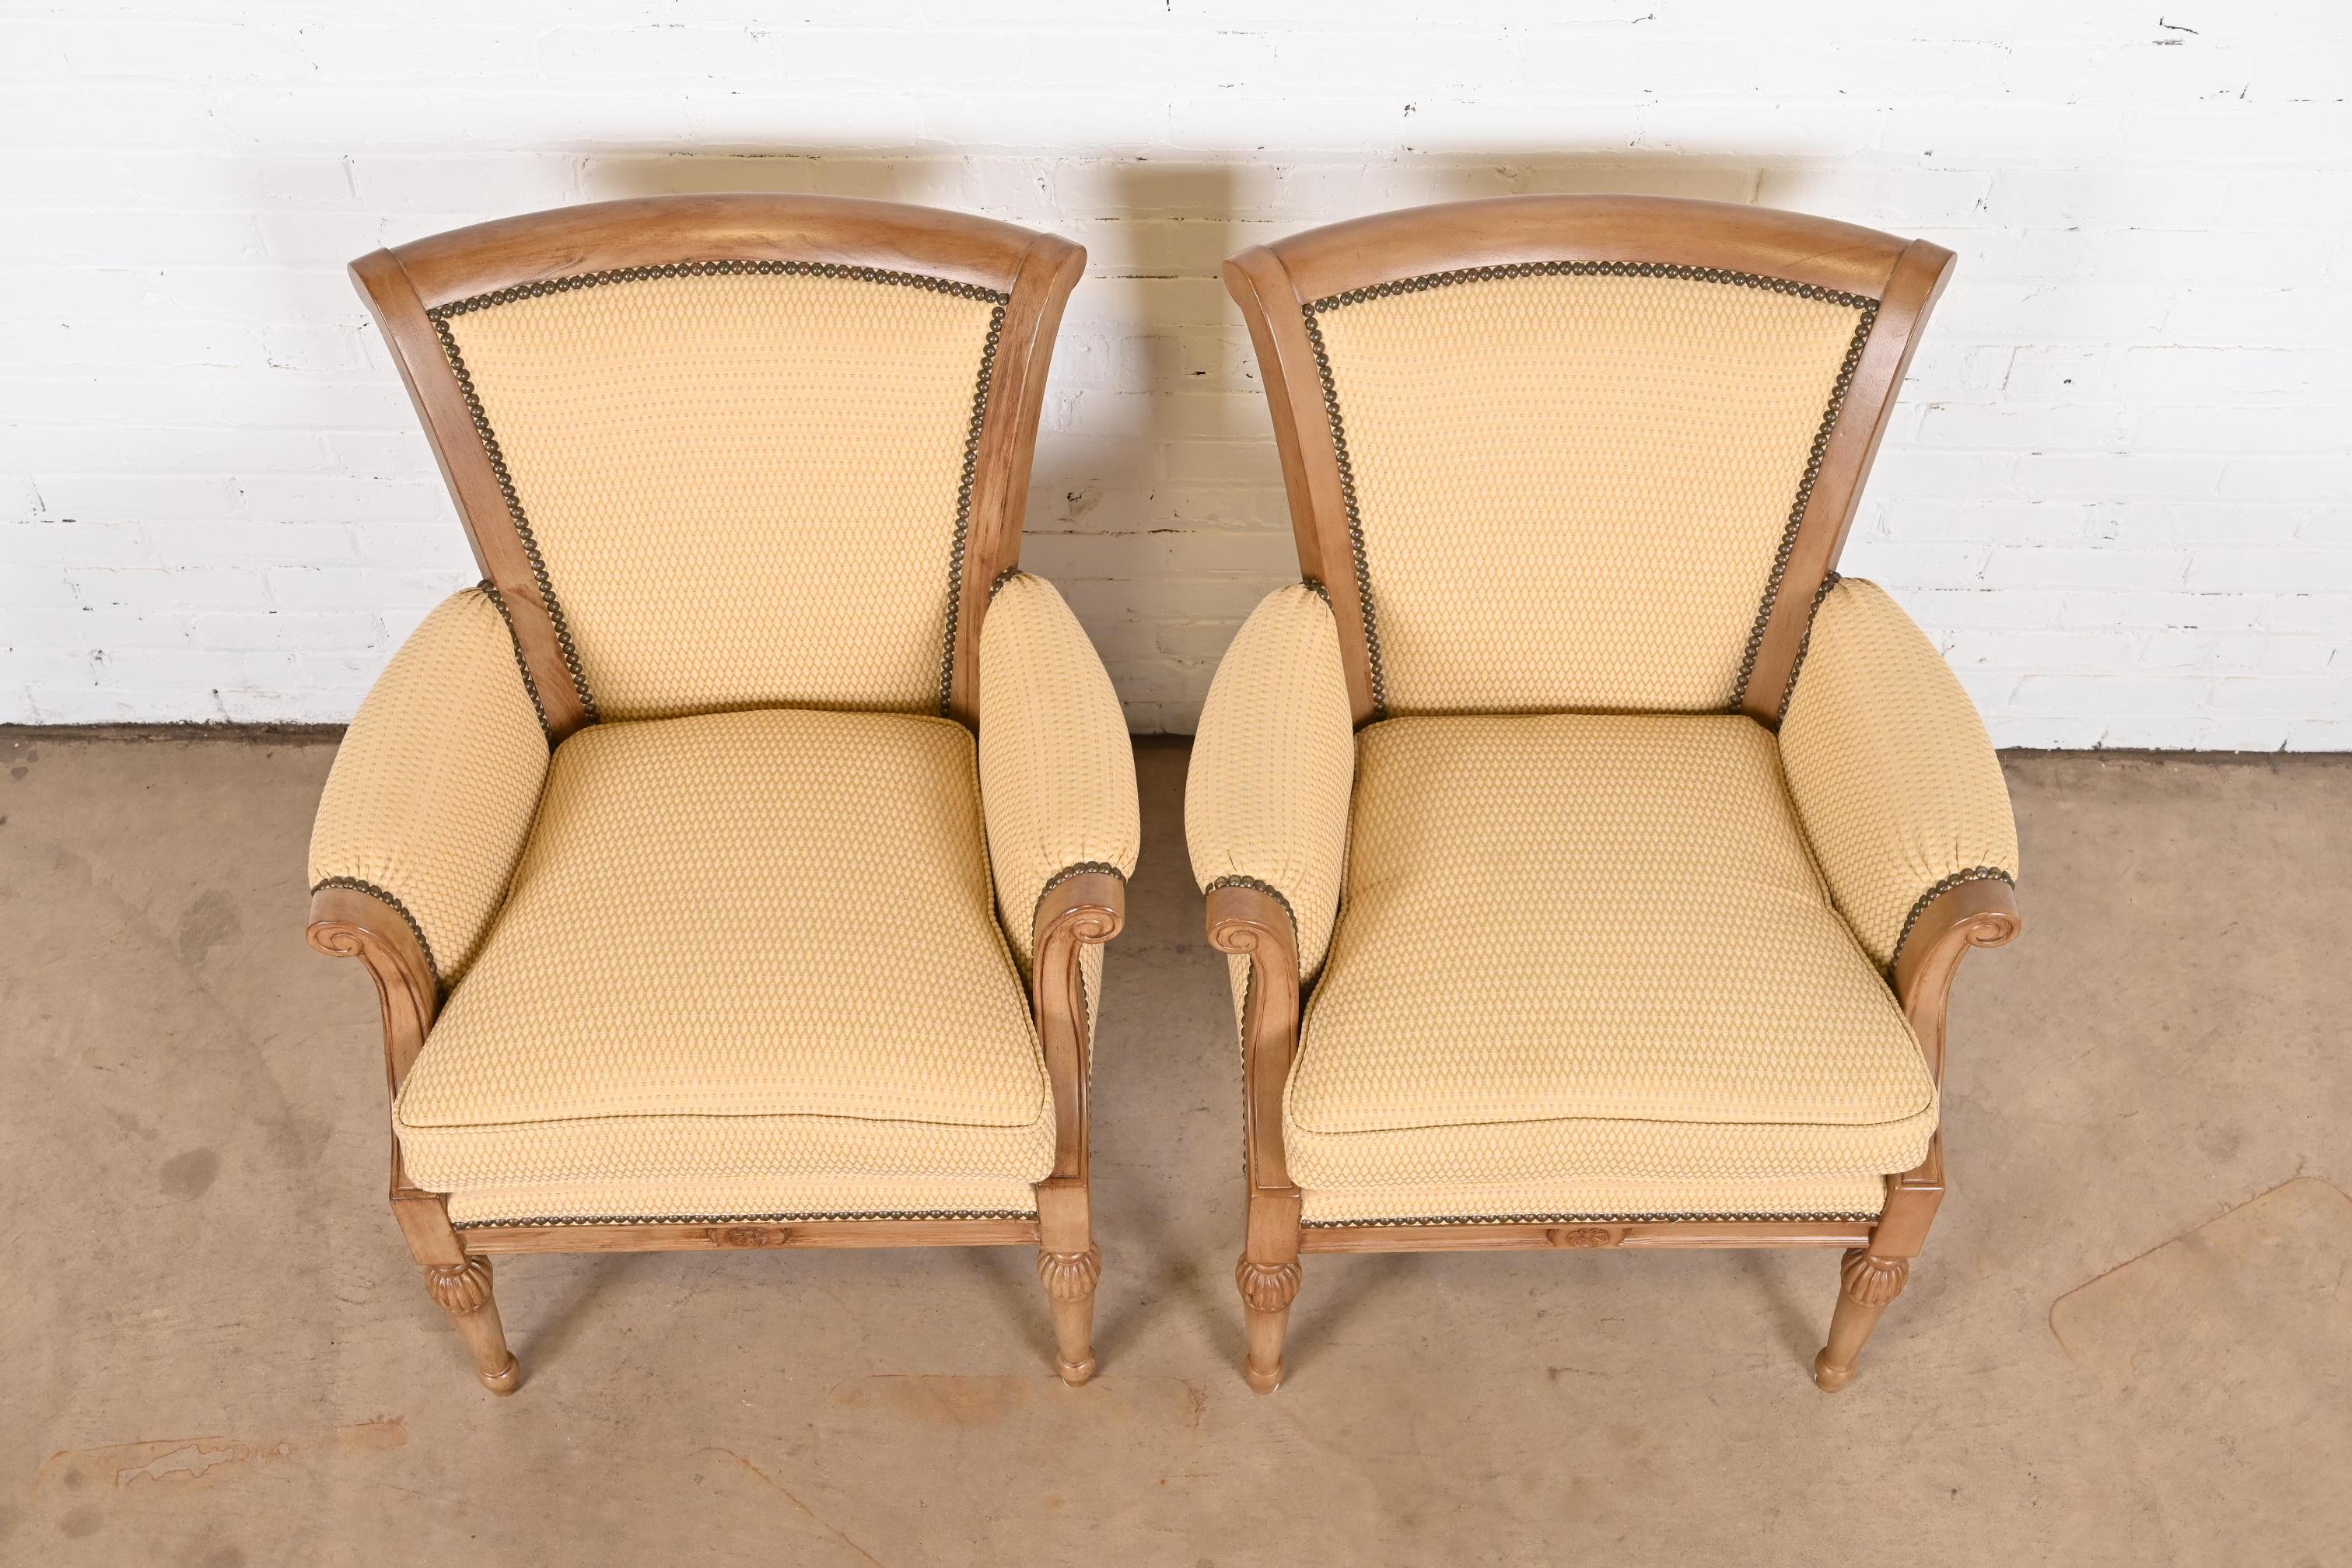 Upholstery Barbara Barry for Henredon French Regency Louis XVI Bergere Chairs, Pair For Sale